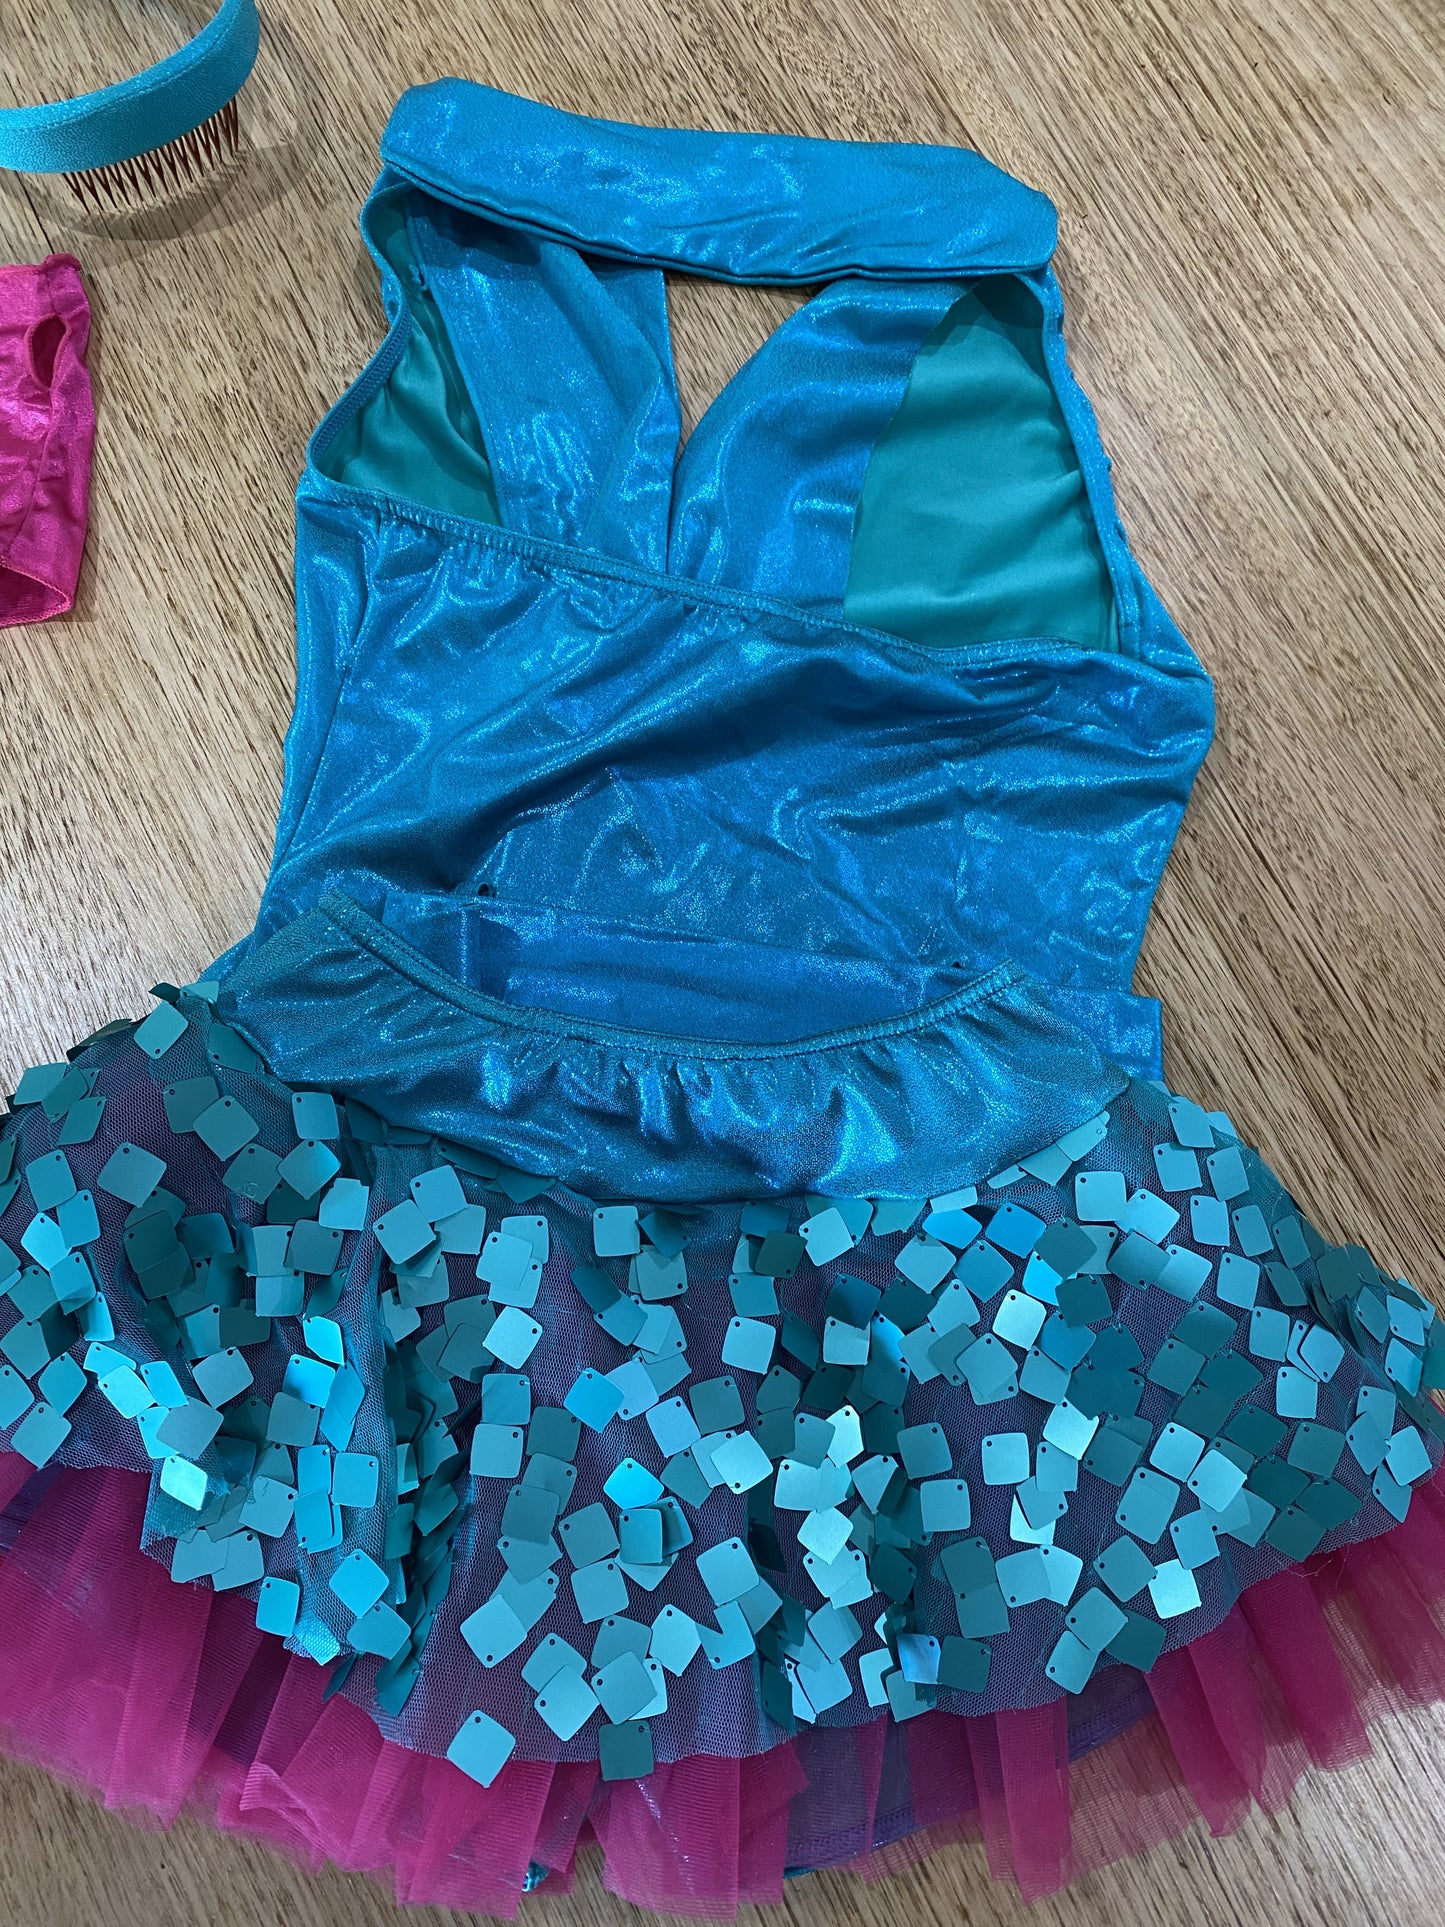 A 32128 turquoise sequins skirt and outfit to razzle - med child